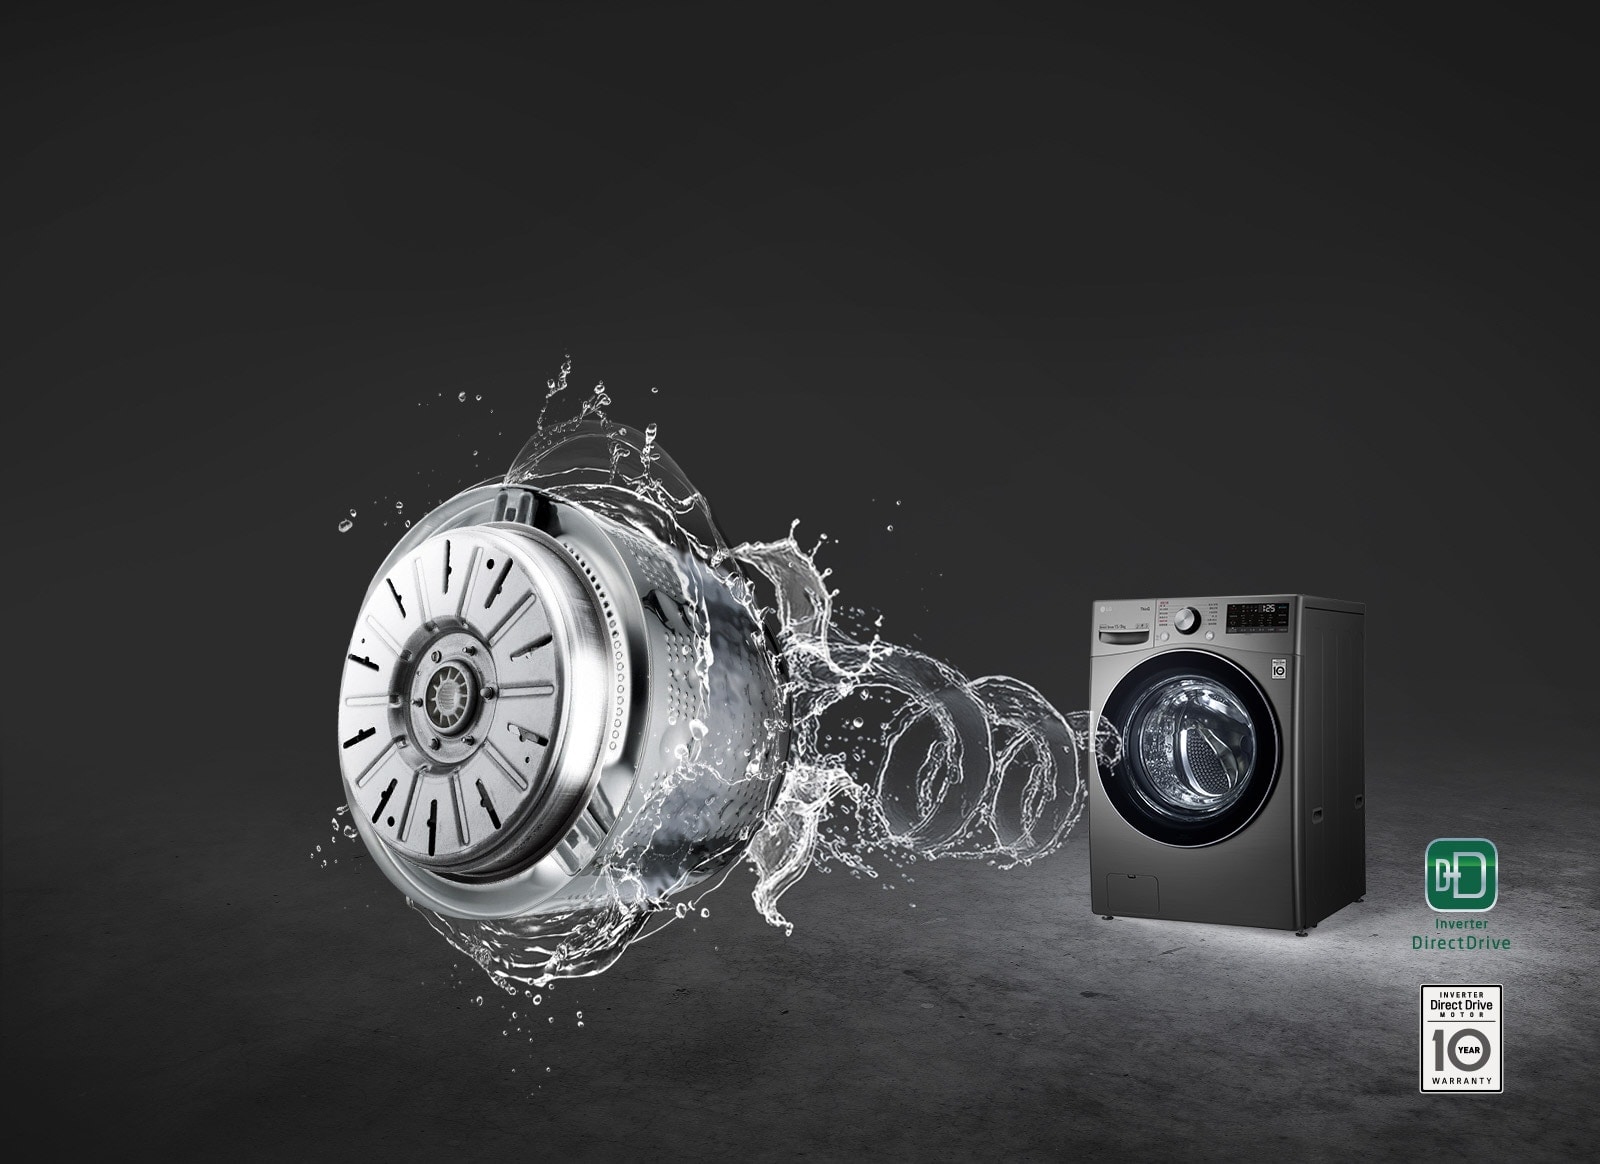 There is a washing machine in a black background and it shows the rotating effect of the washing machine popping out